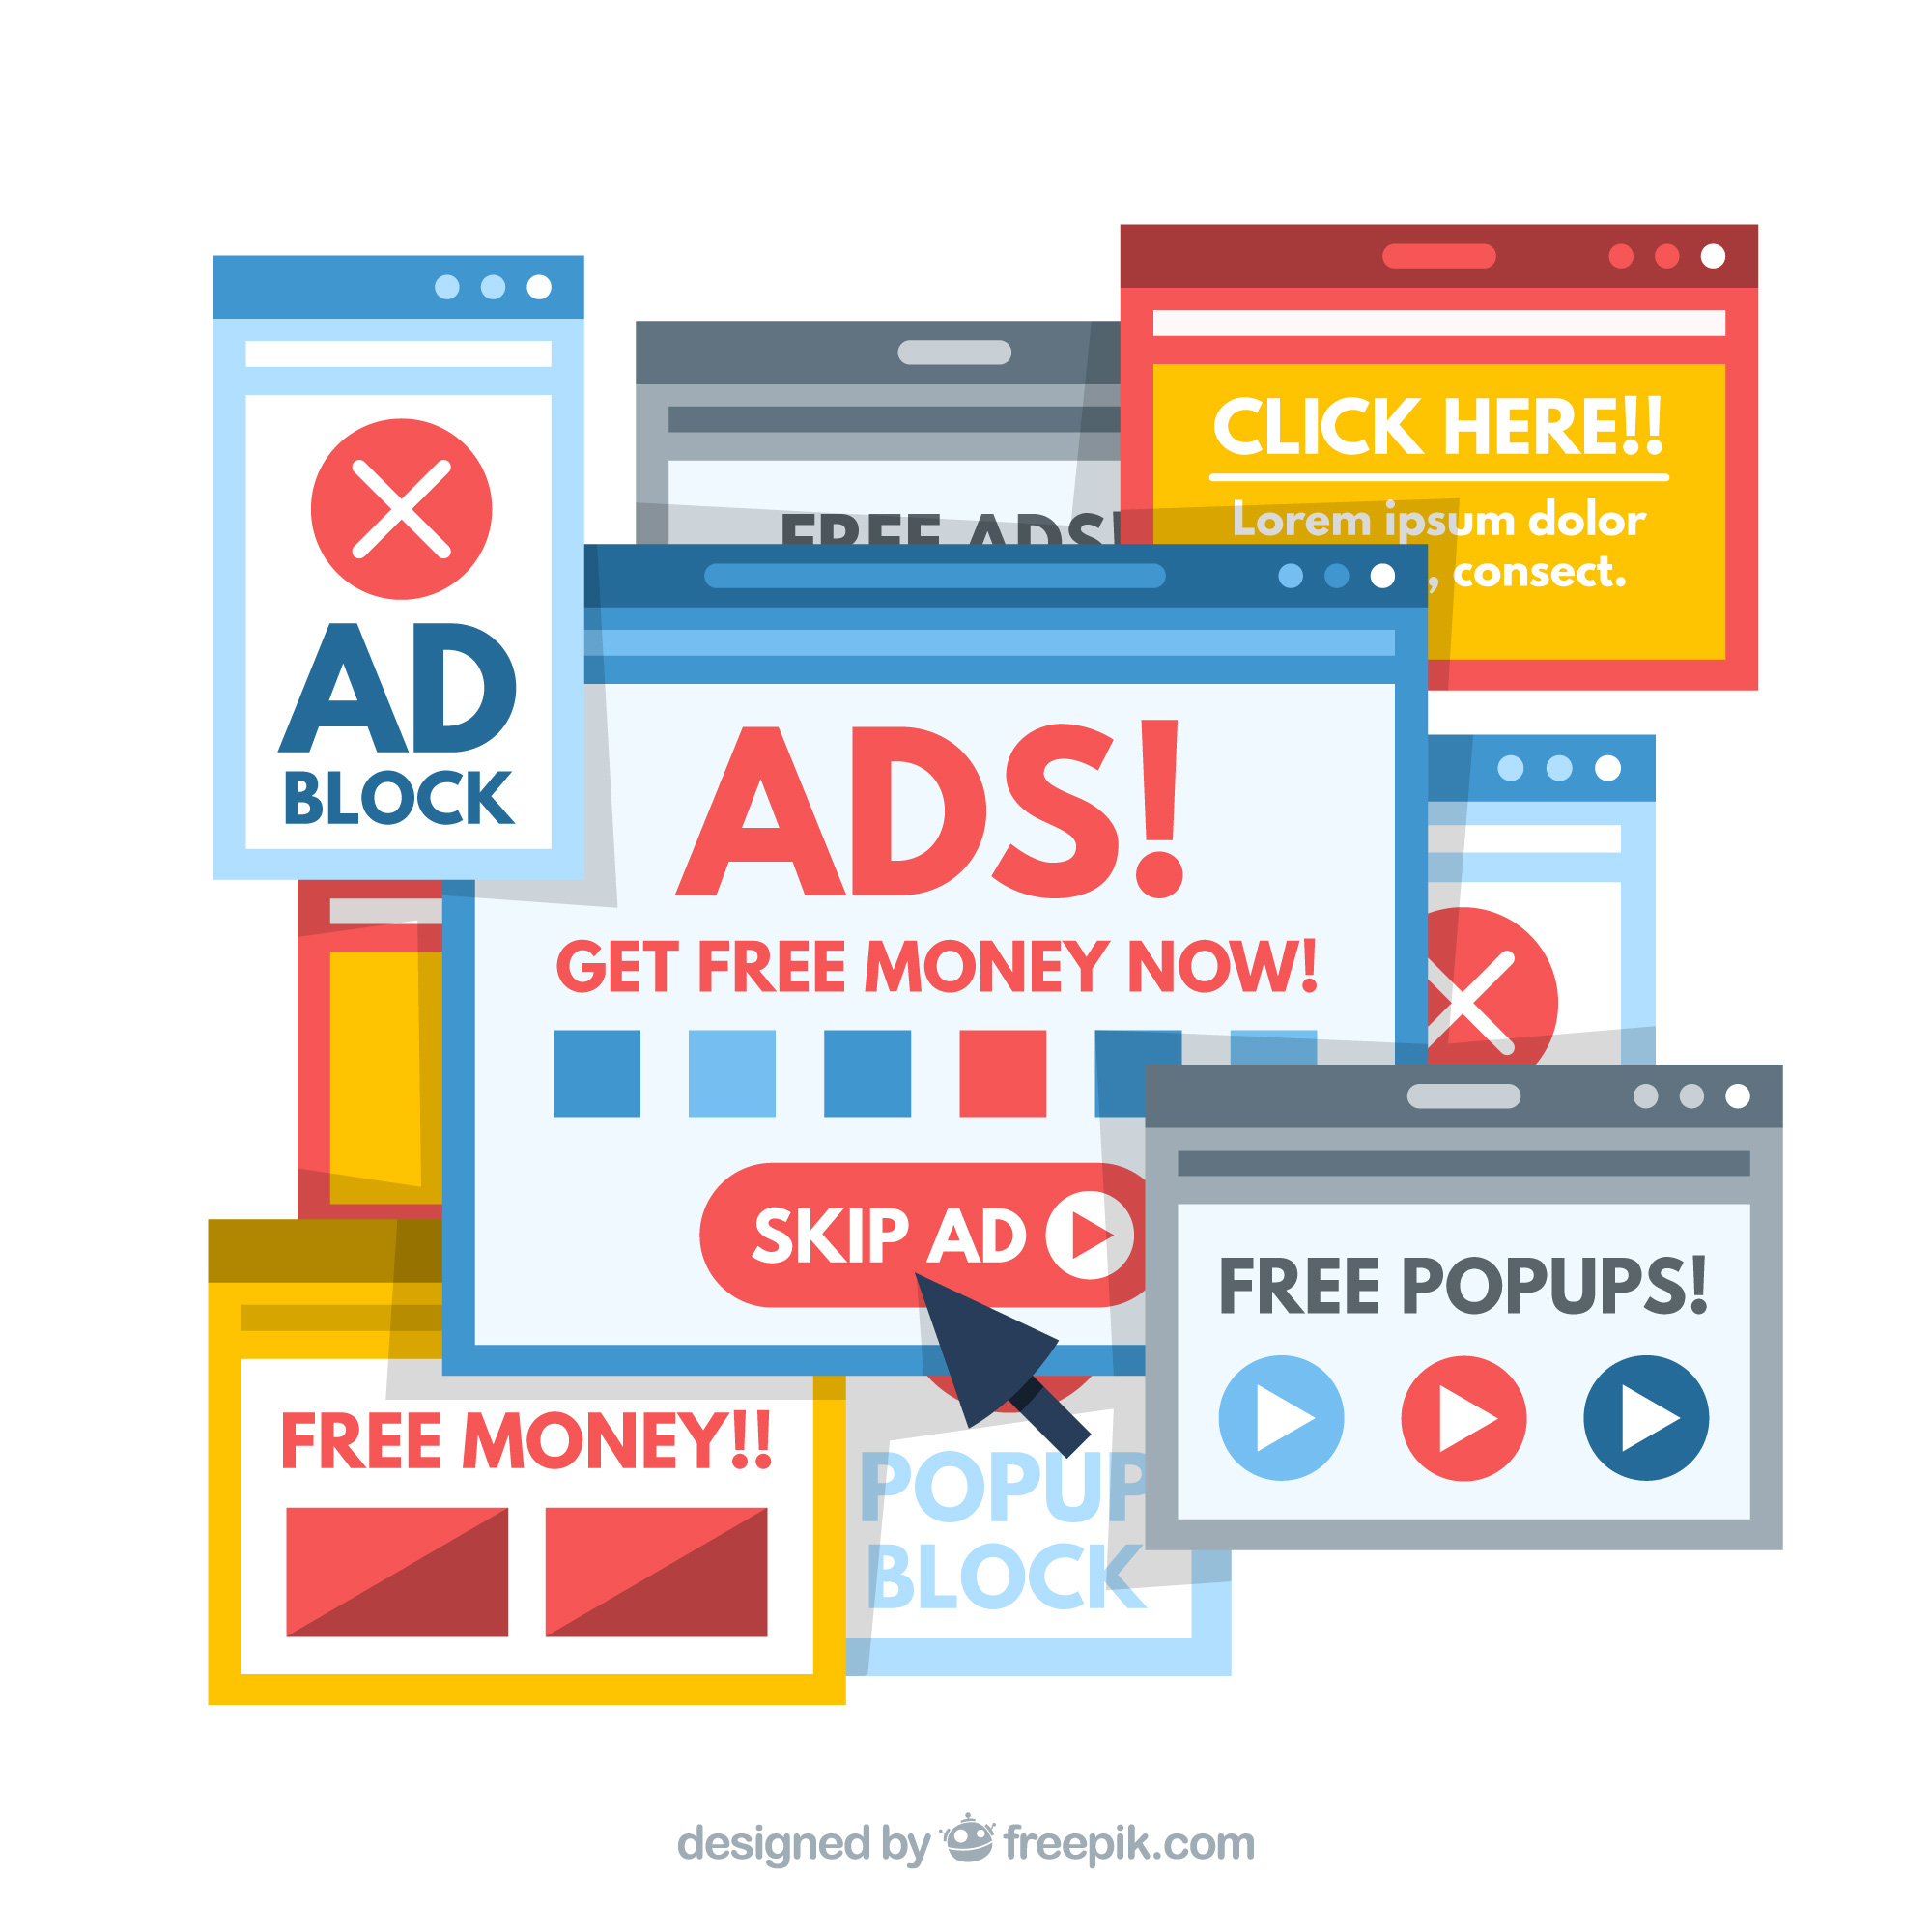 6 Tips for Creating Effective Google Ads on a Small Budget